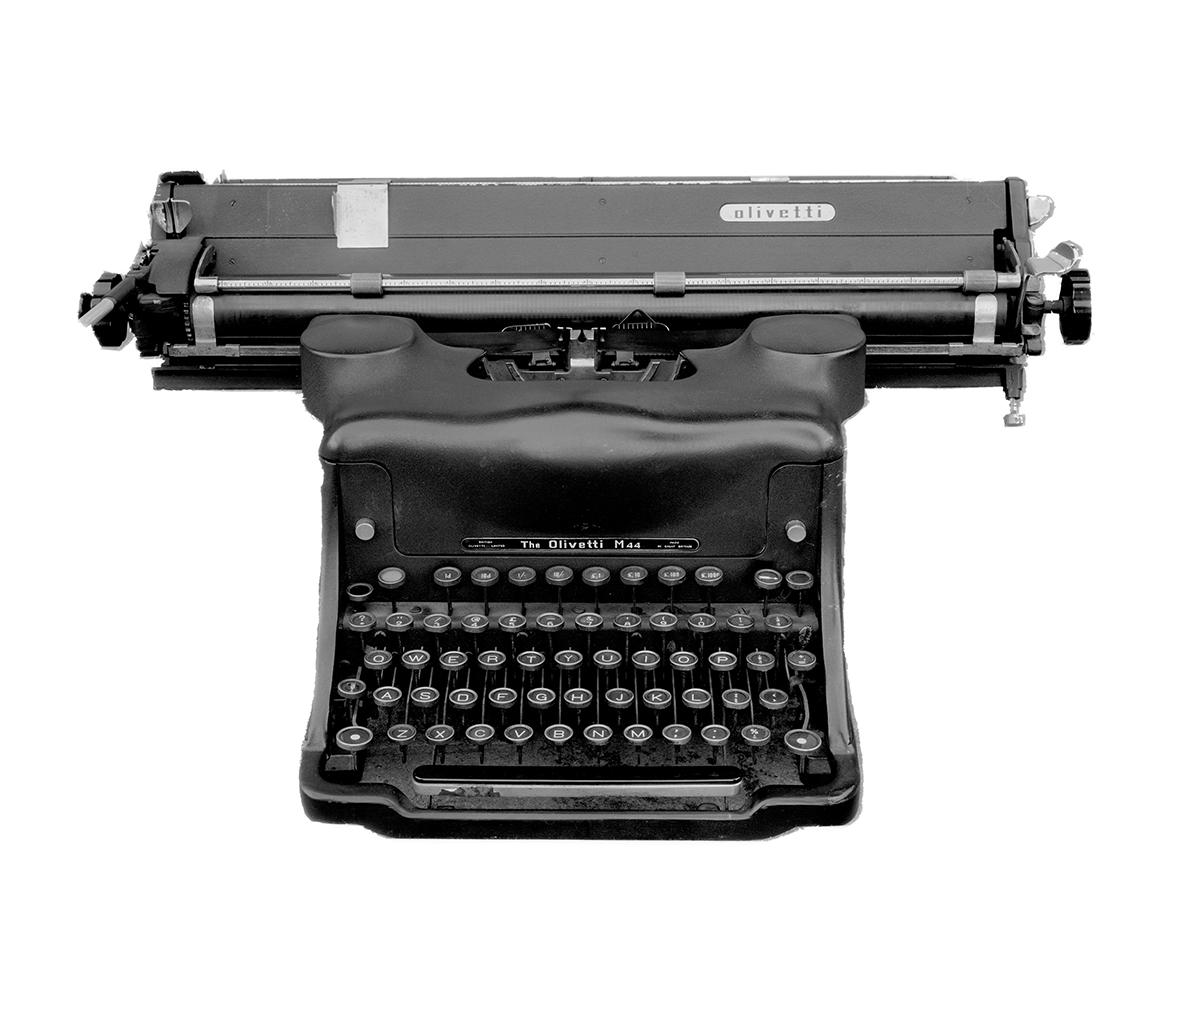 Samuel Field Black and White Photograph - Orthochromatic Positive - Black & White Photography of a Typewriter